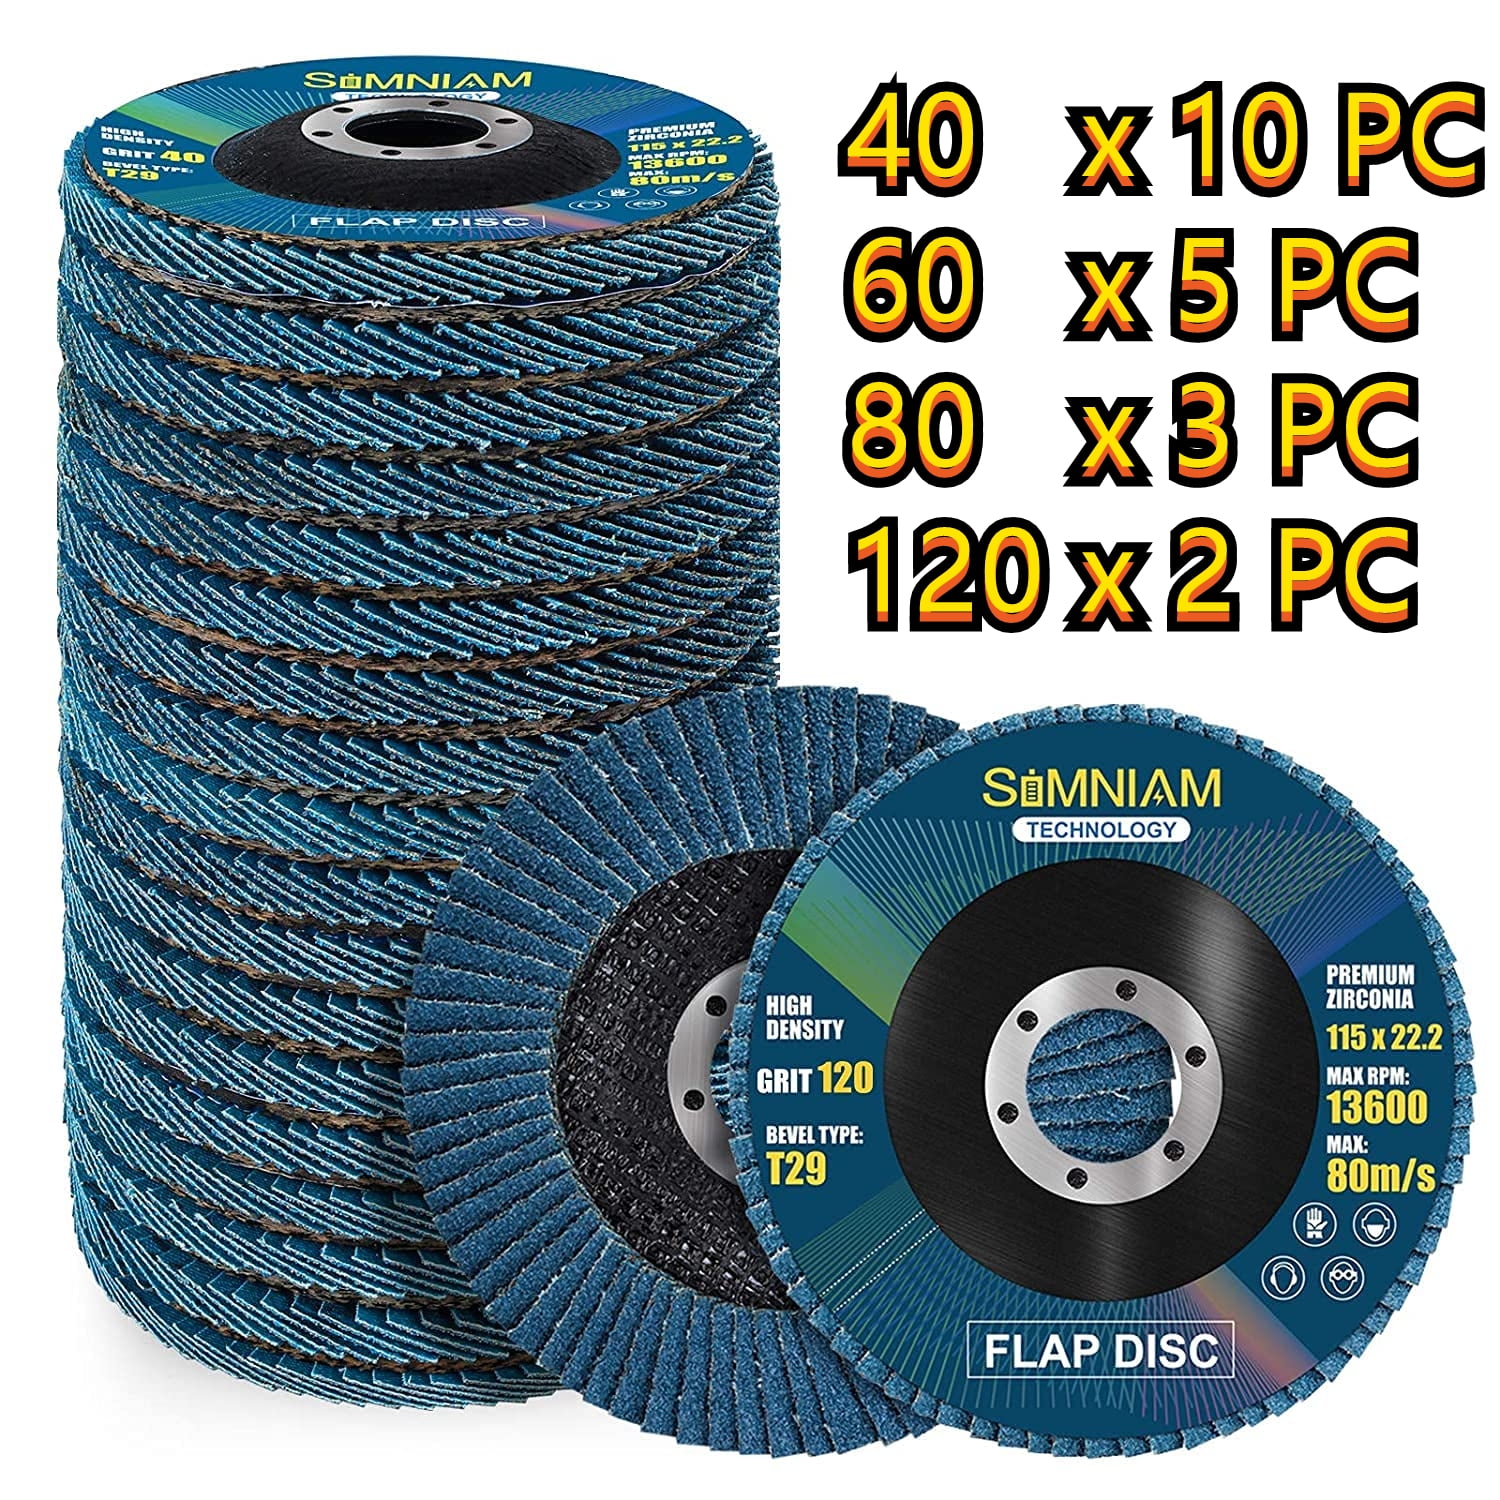 20pcs FLAP DISC 5 inch x 7/8" Zirconia 60 grit for Stainless Steel & Metal 